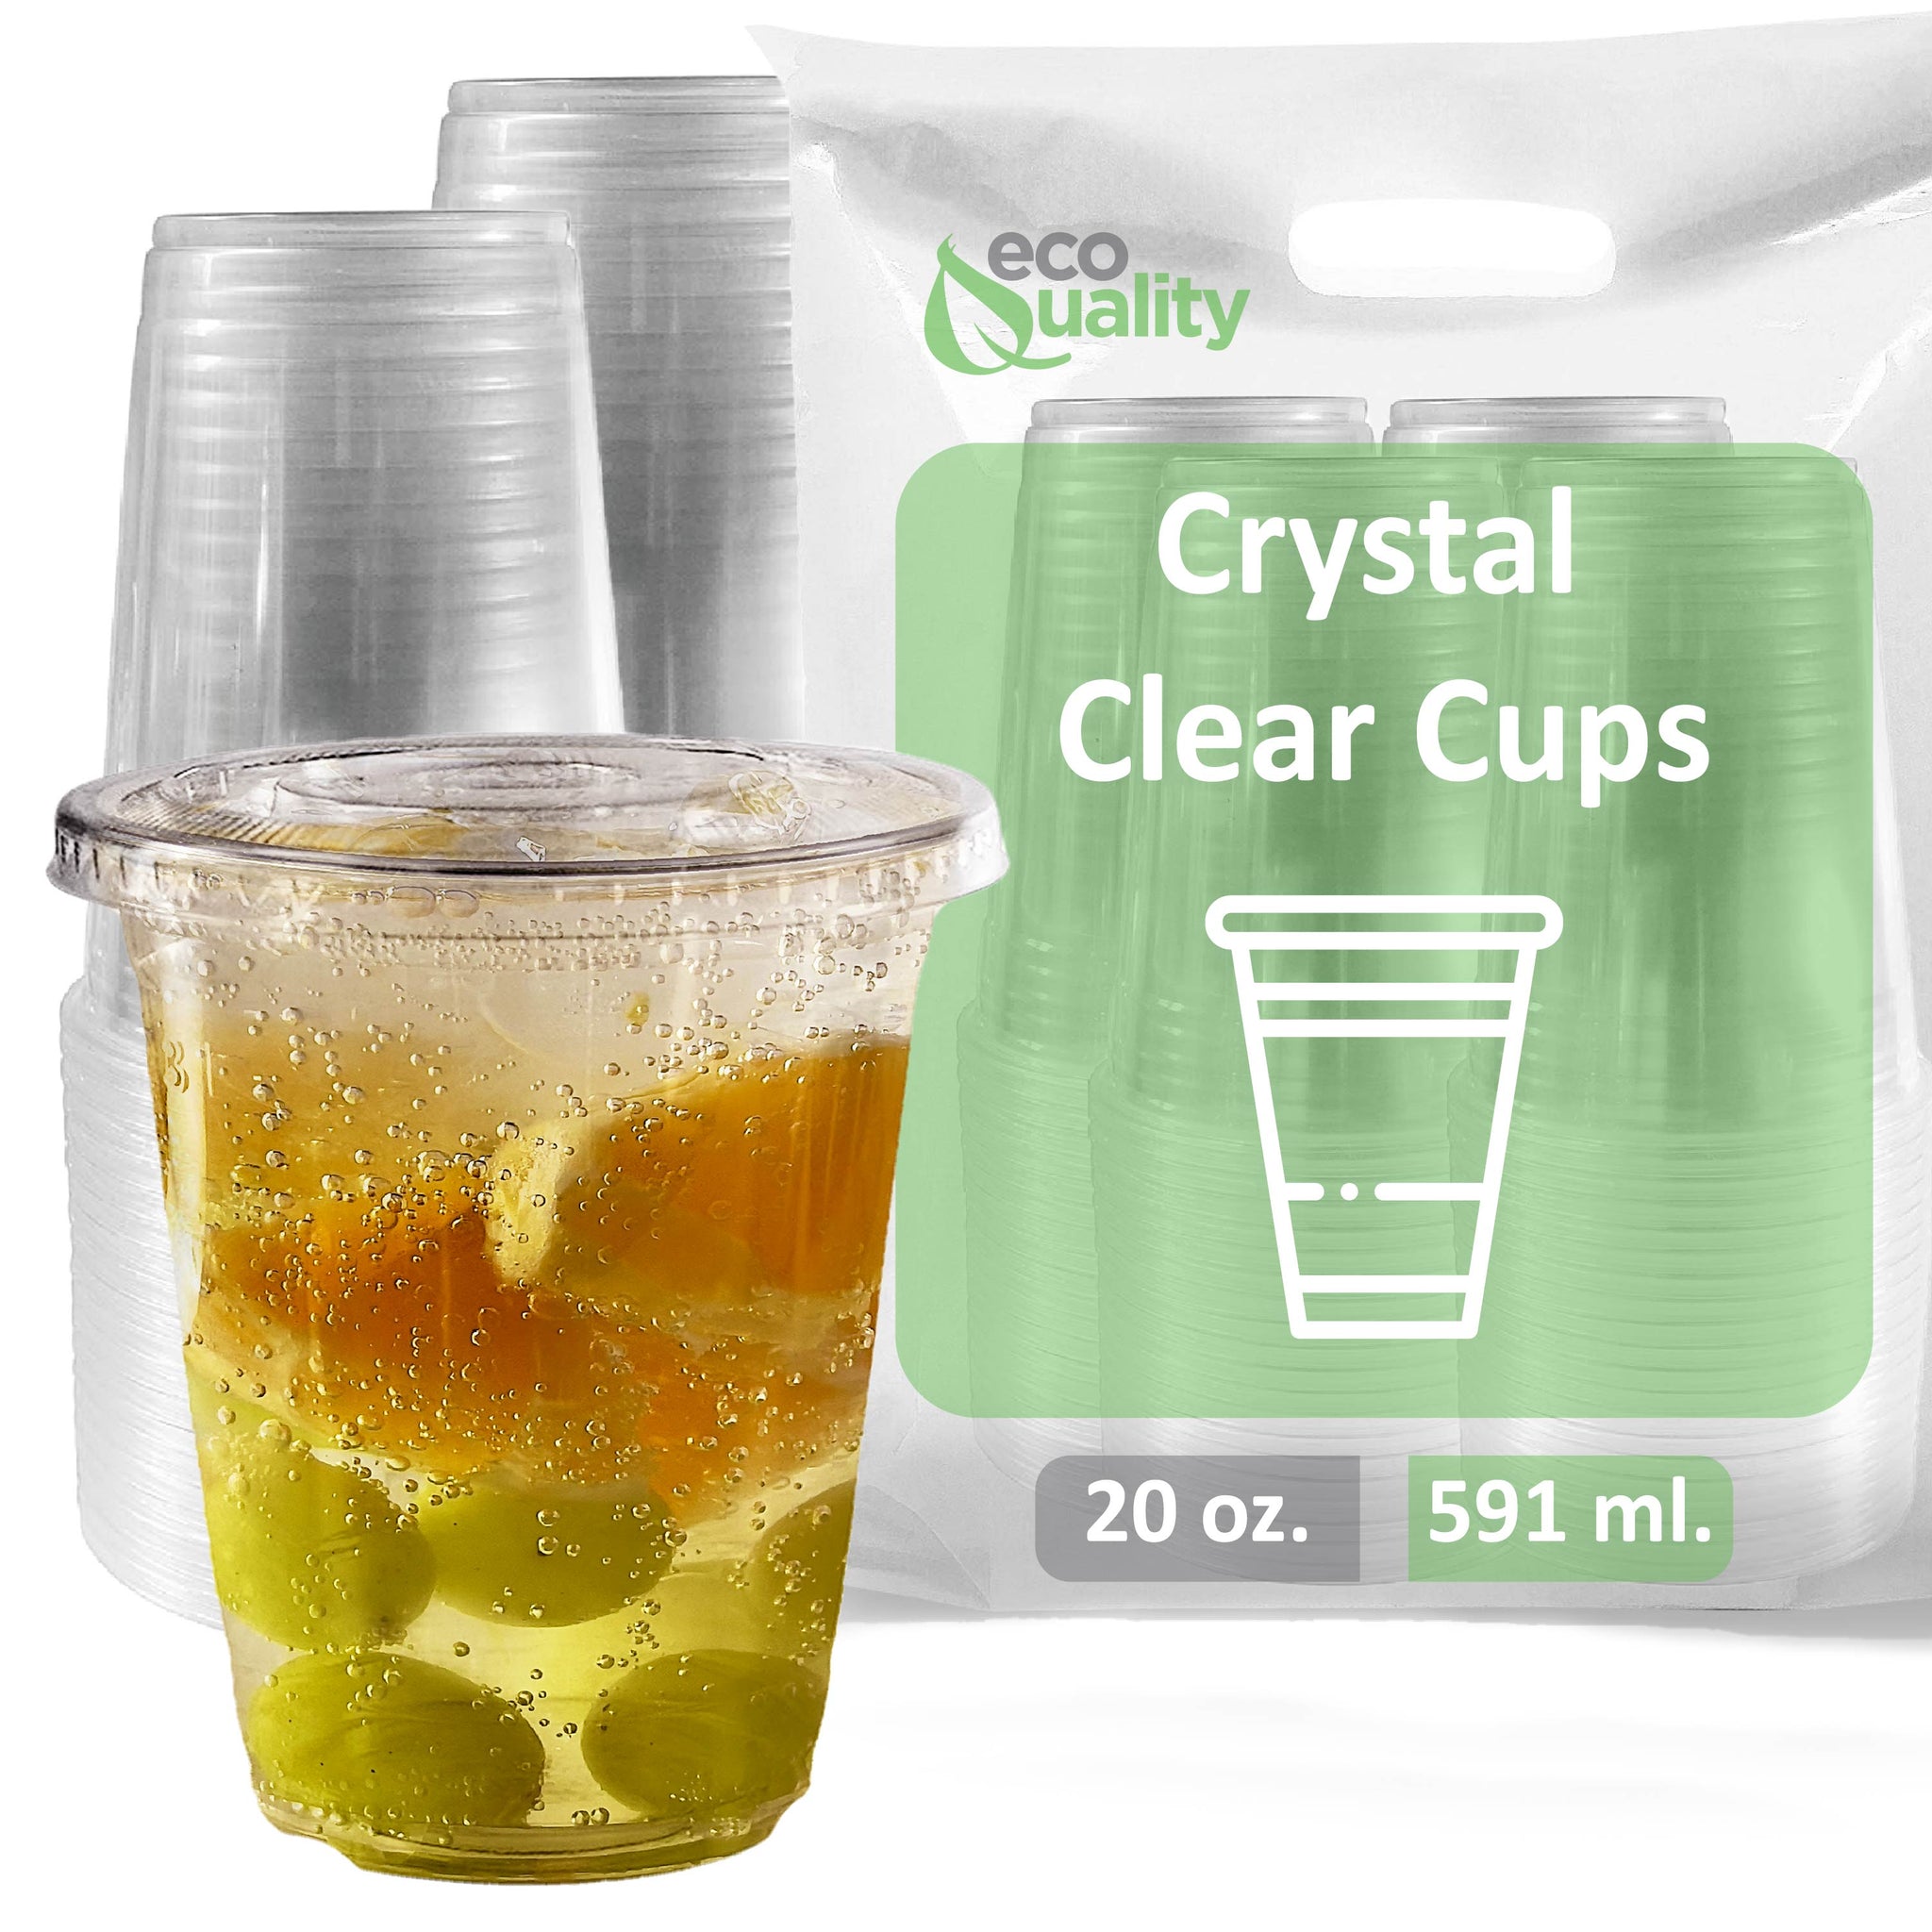 20oz Disposable Pet Clear Plastic Smoothie Cups with Clear Flat Lids